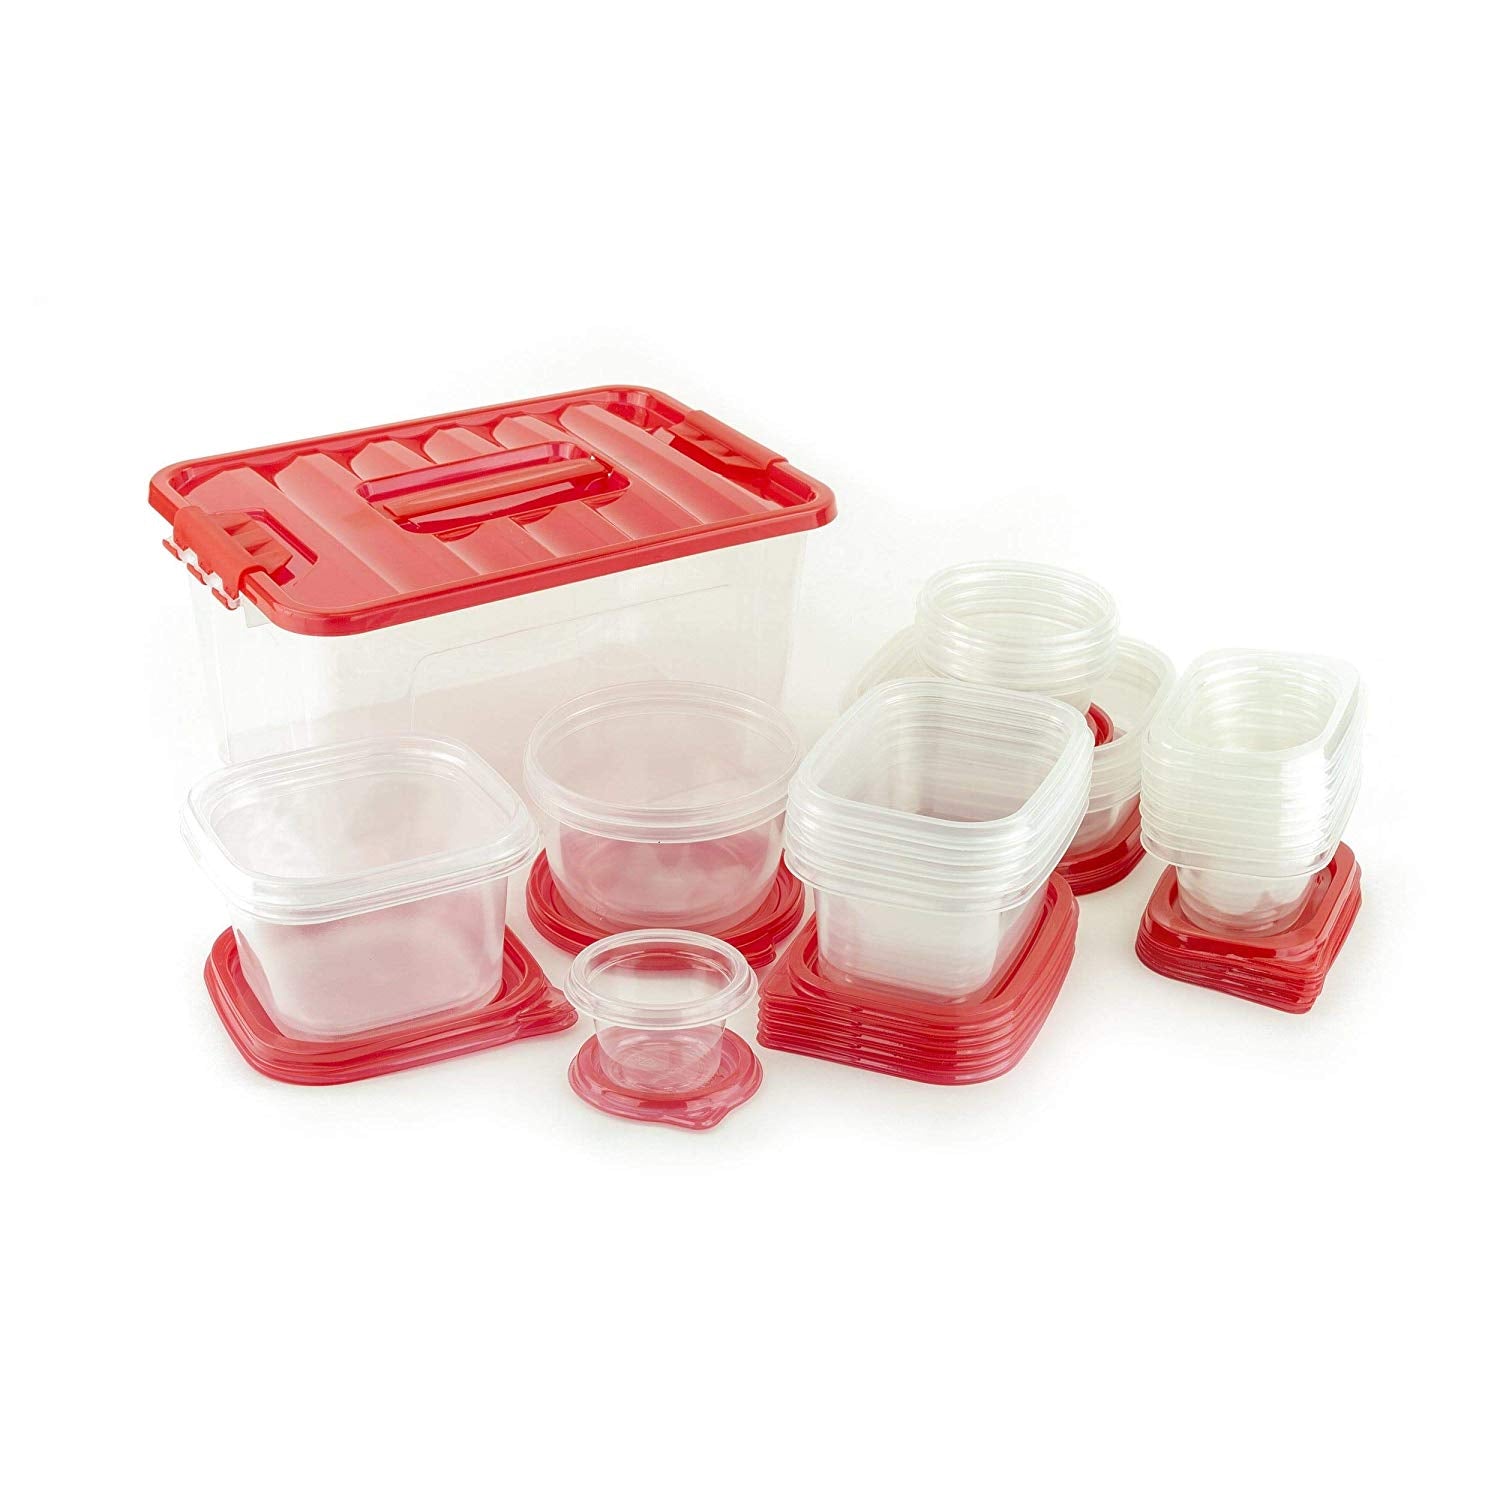 54 Piece Plastic Food Container Set - 27 Plastic Storage Containers with Air Tight Lids (Green)